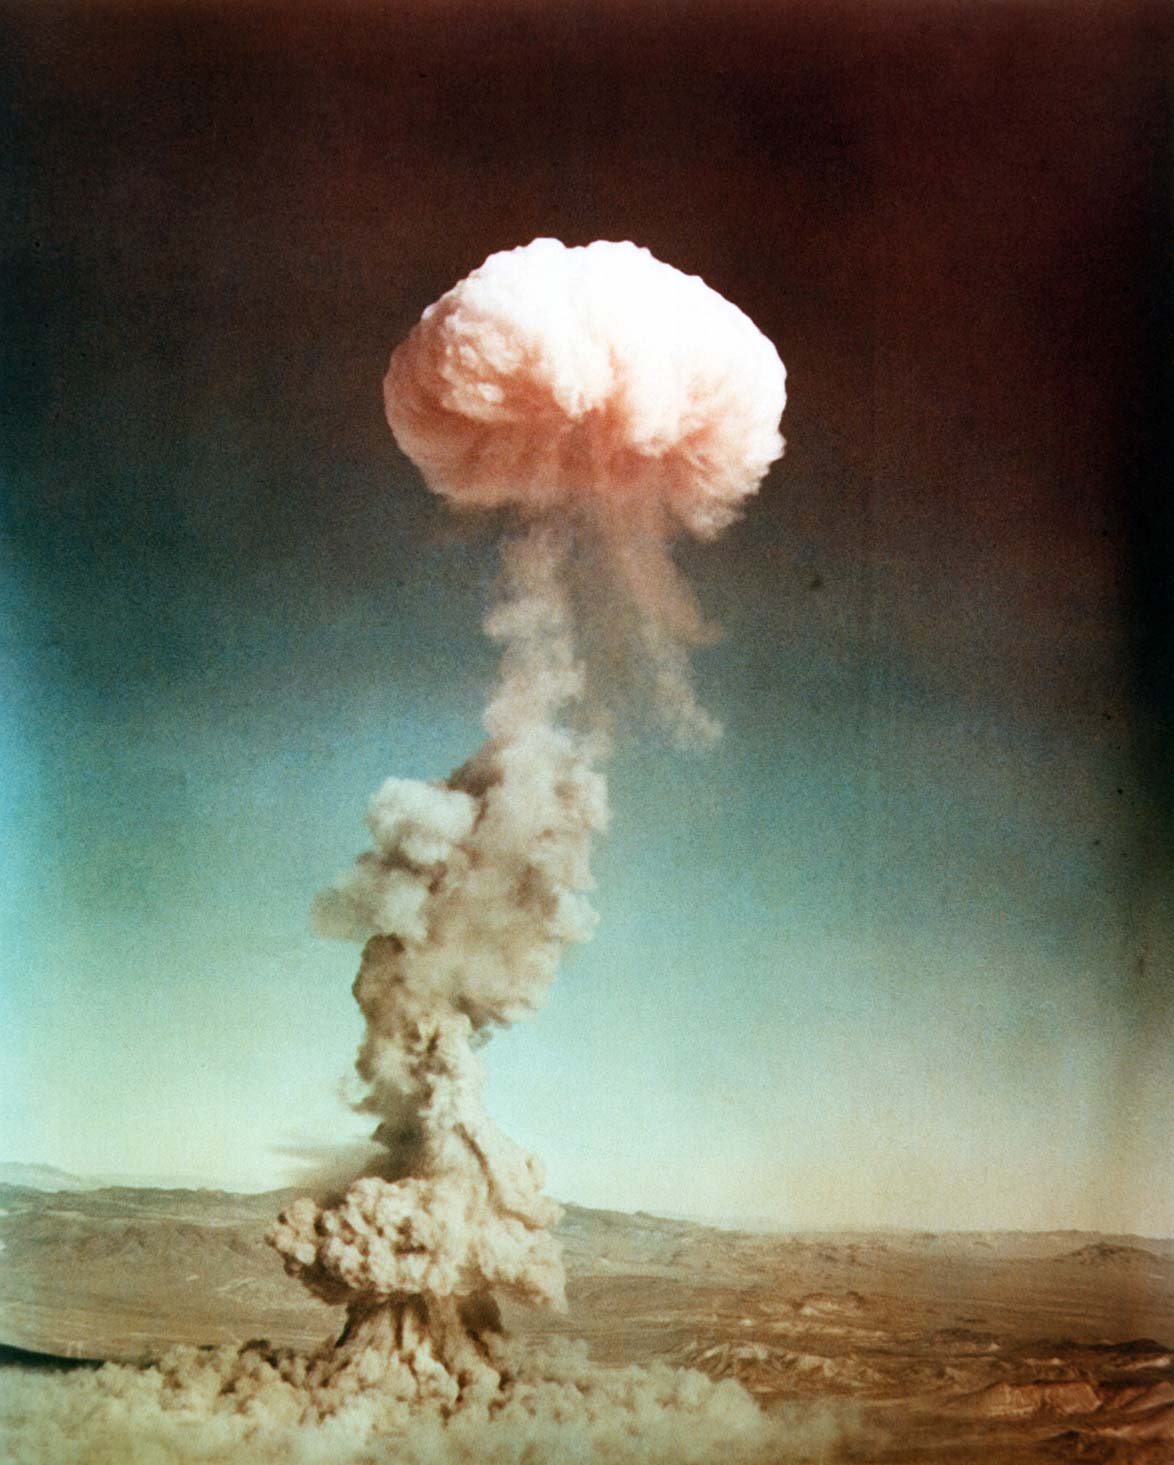 EASY
EASY part of Operation Buster was a 31 kiloton weapons related device fired November 5, 1951 at the Nevada Test Site.
Keywords: Nevada Test Site, Mercury, Nye County, Nevada NTS